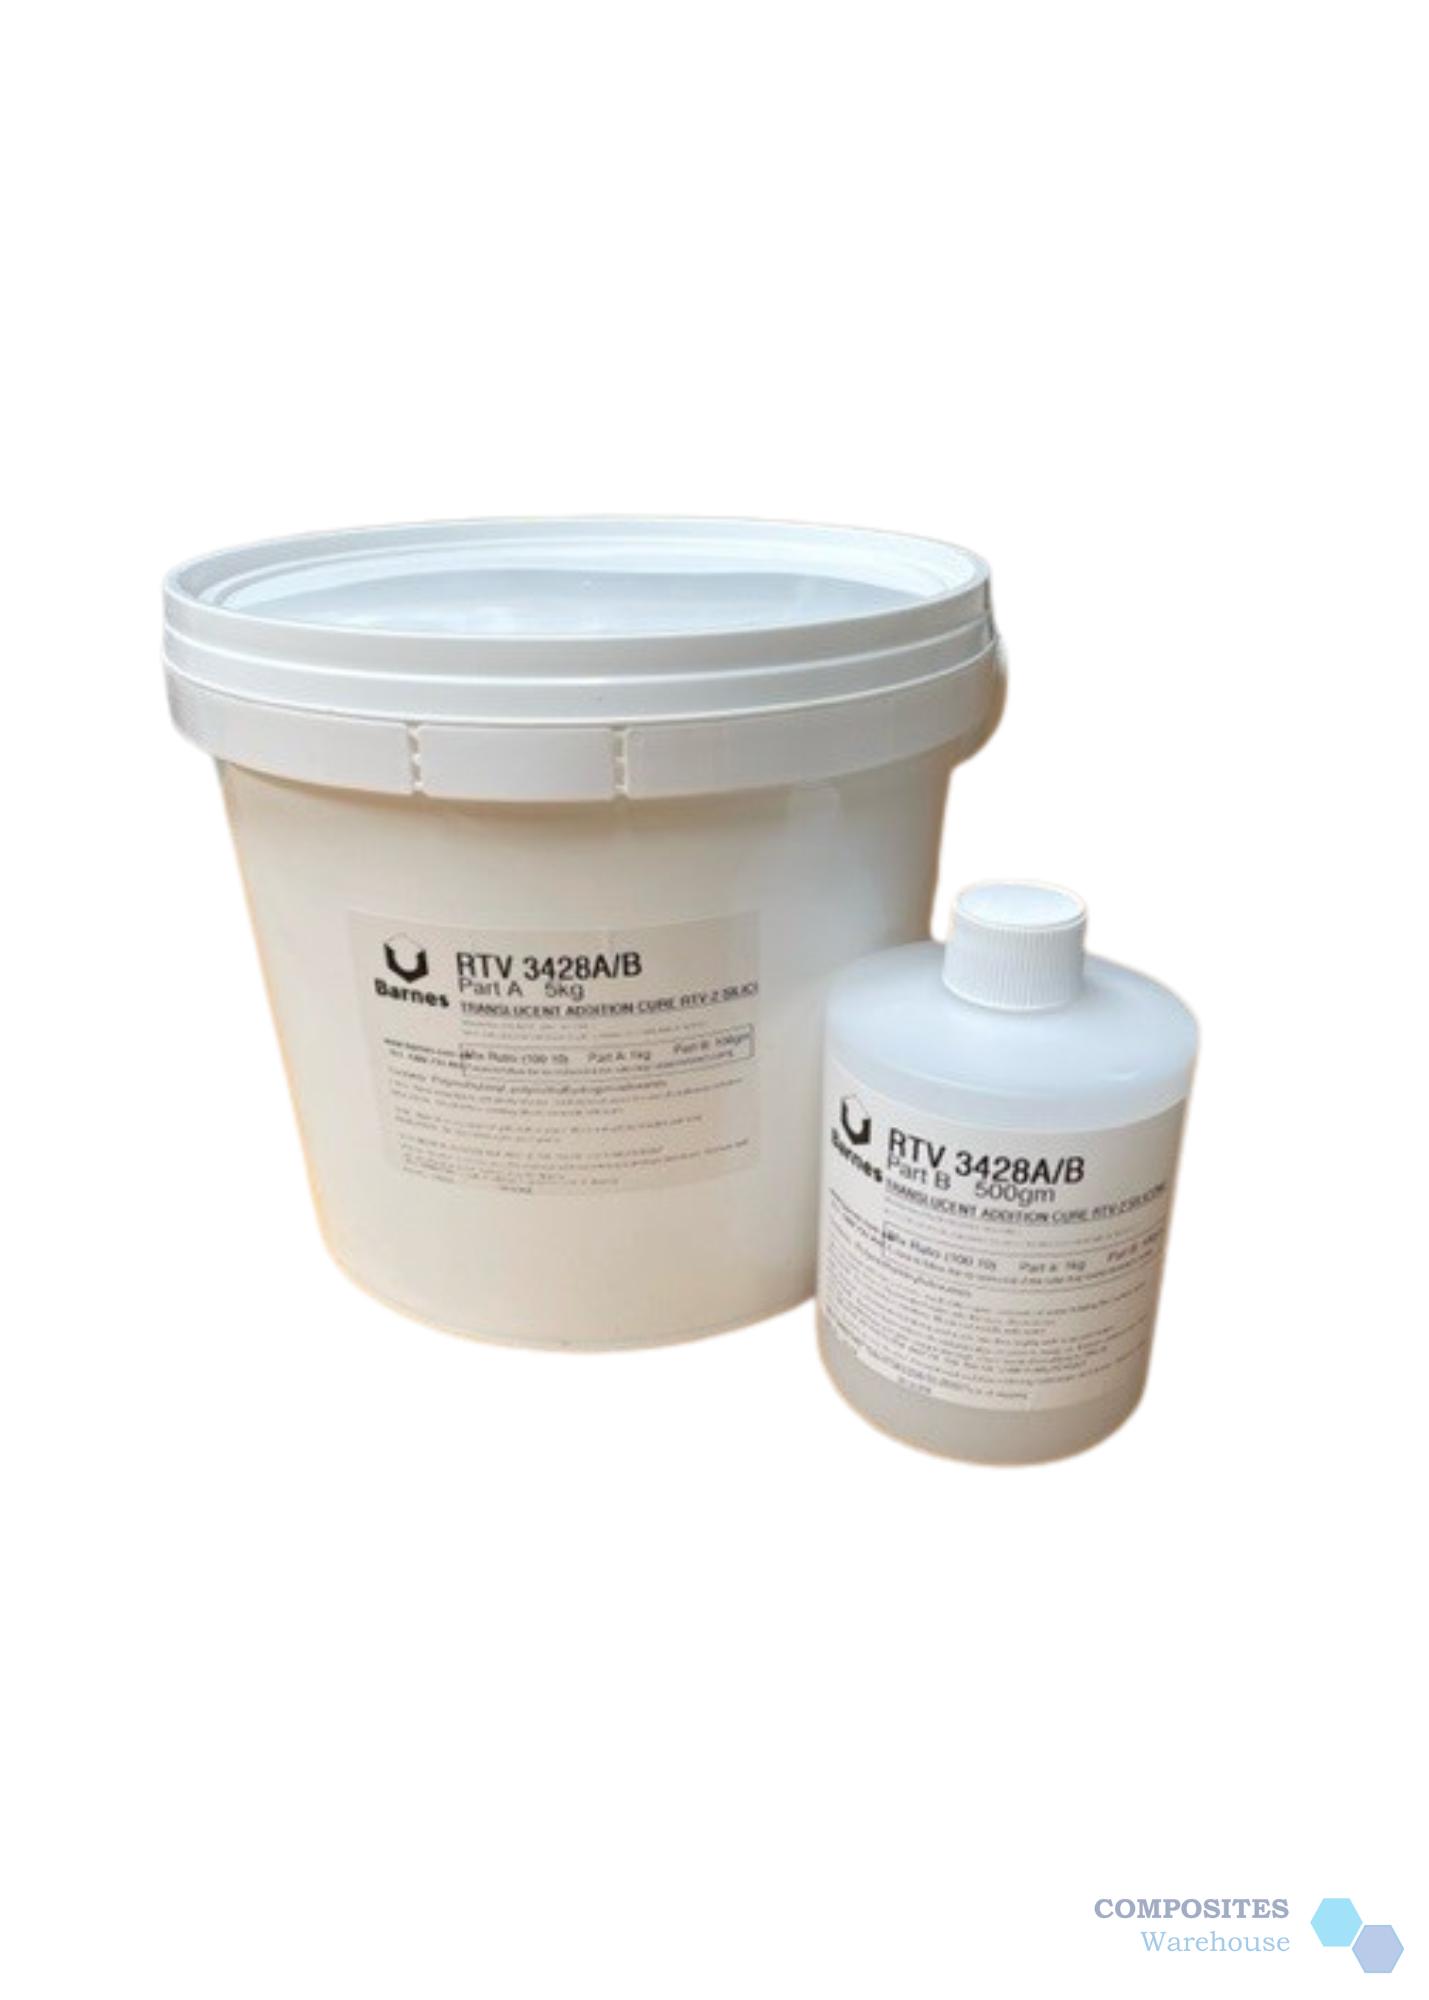 Silicone RTV 3428 spécial contact alimentaire (1KG) - illDESIGN-France